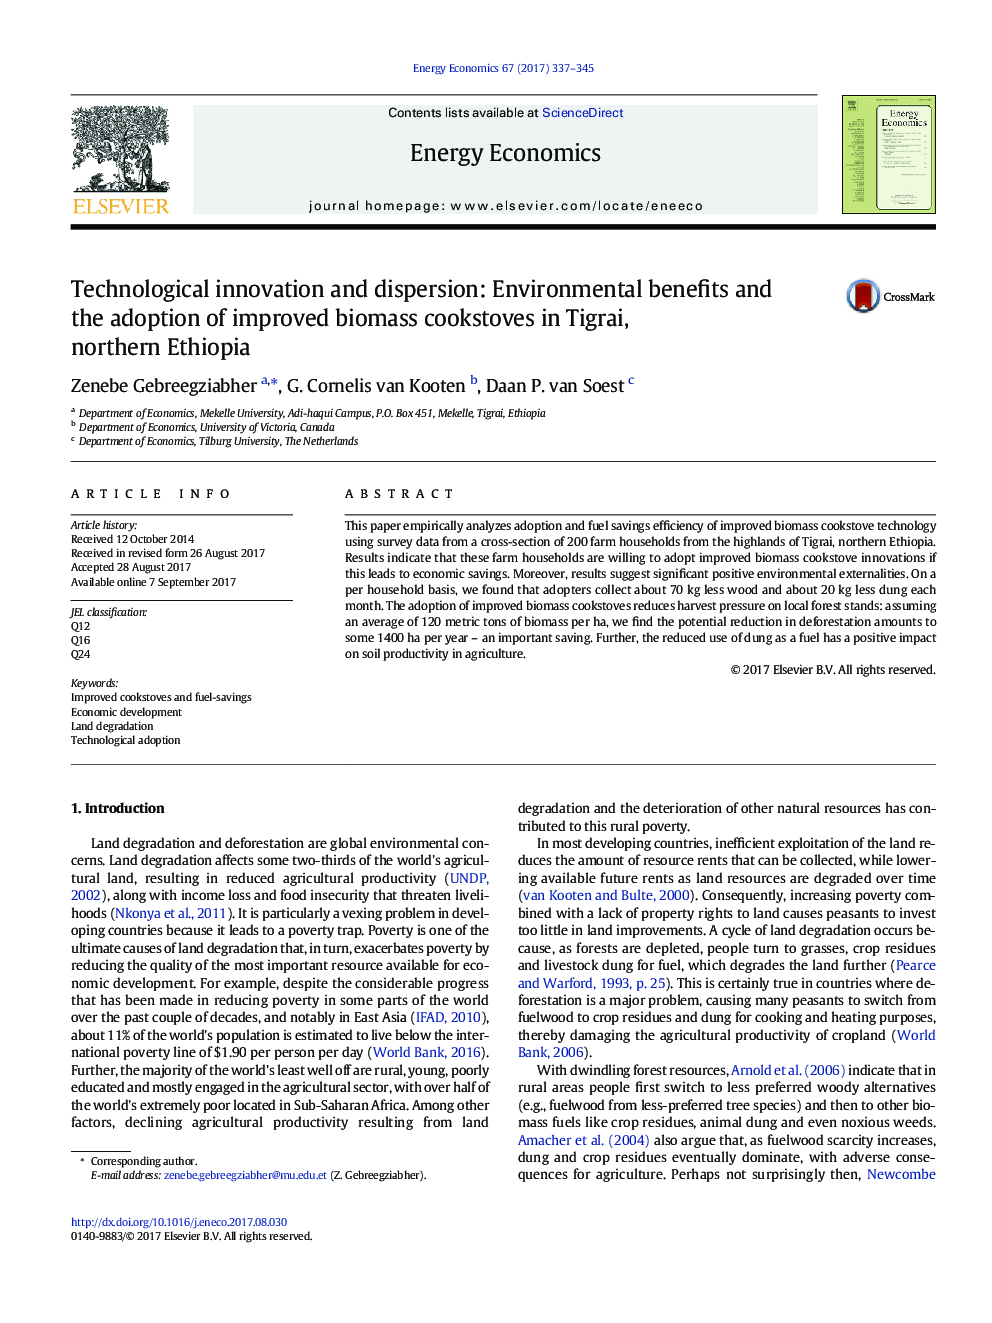 Technological innovation and dispersion: Environmental benefits and the adoption of improved biomass cookstoves in Tigrai, northern Ethiopia